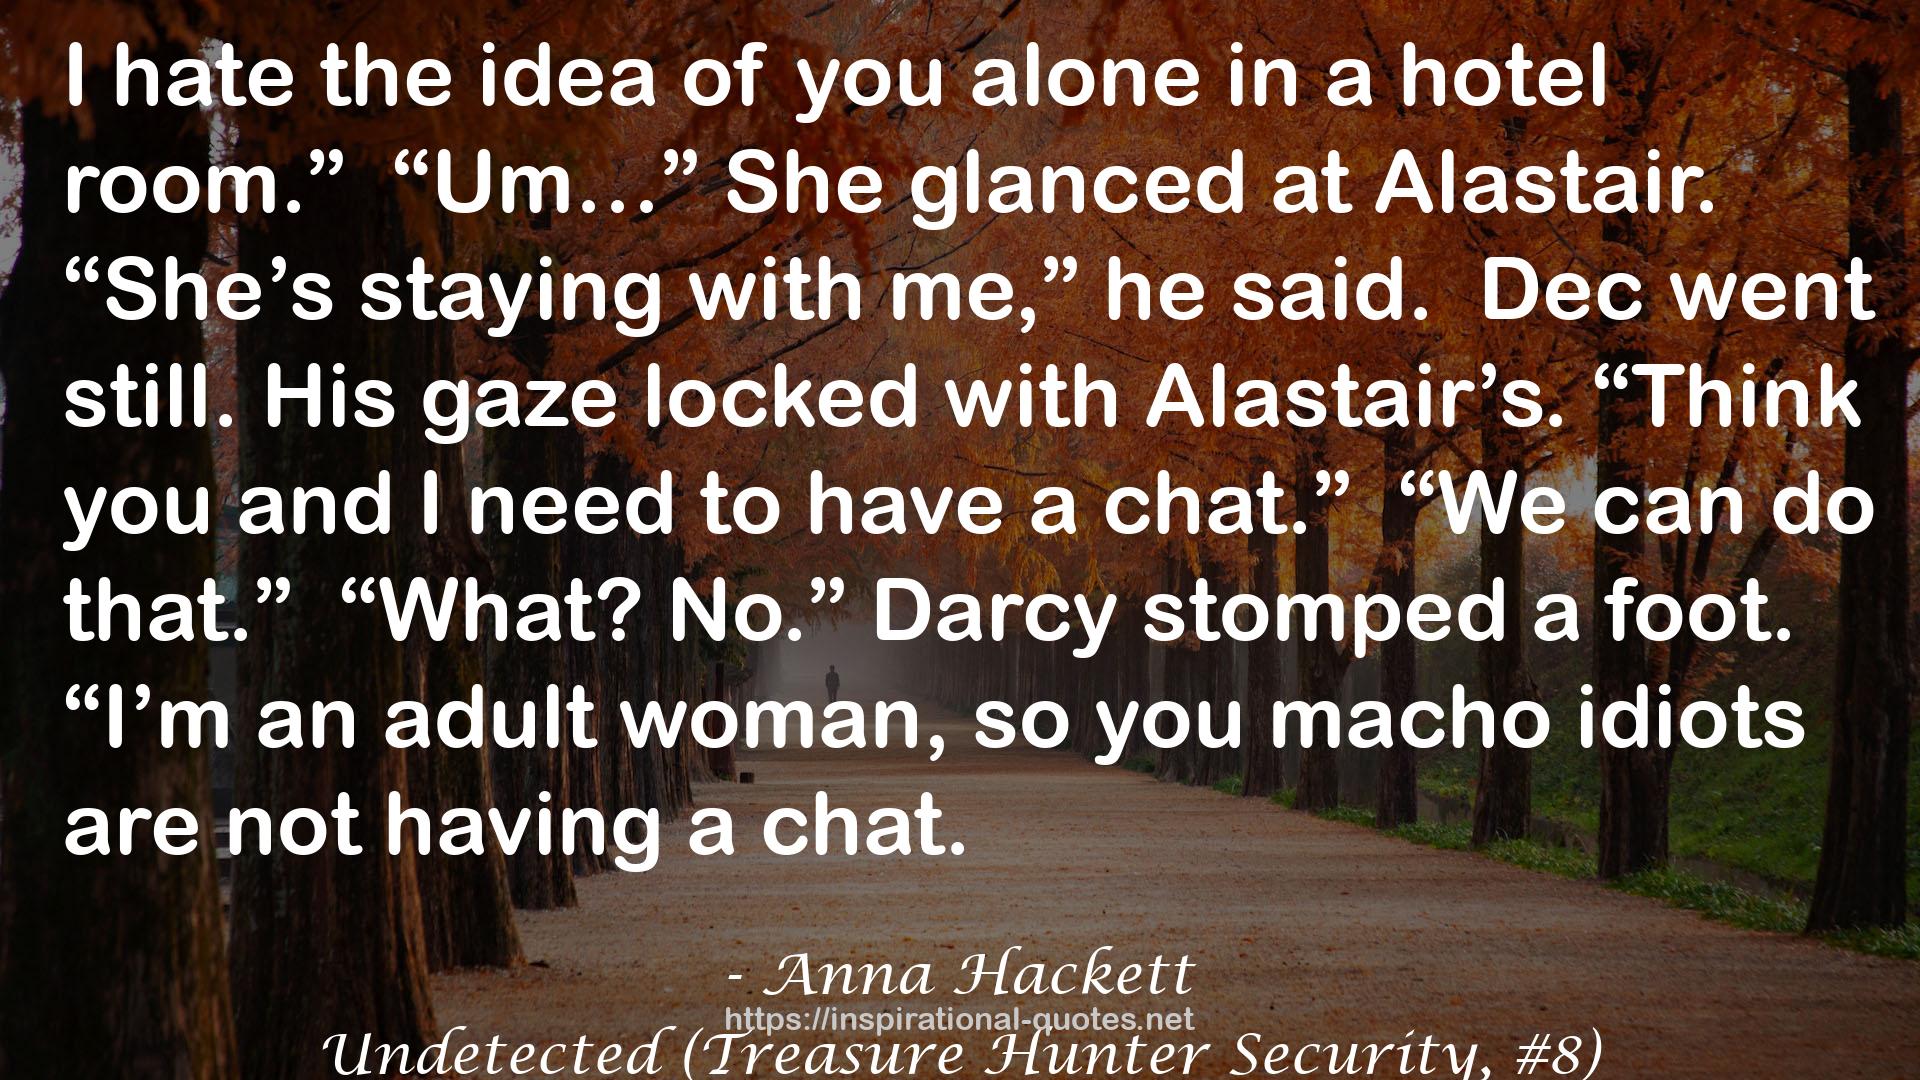 Undetected (Treasure Hunter Security, #8) QUOTES